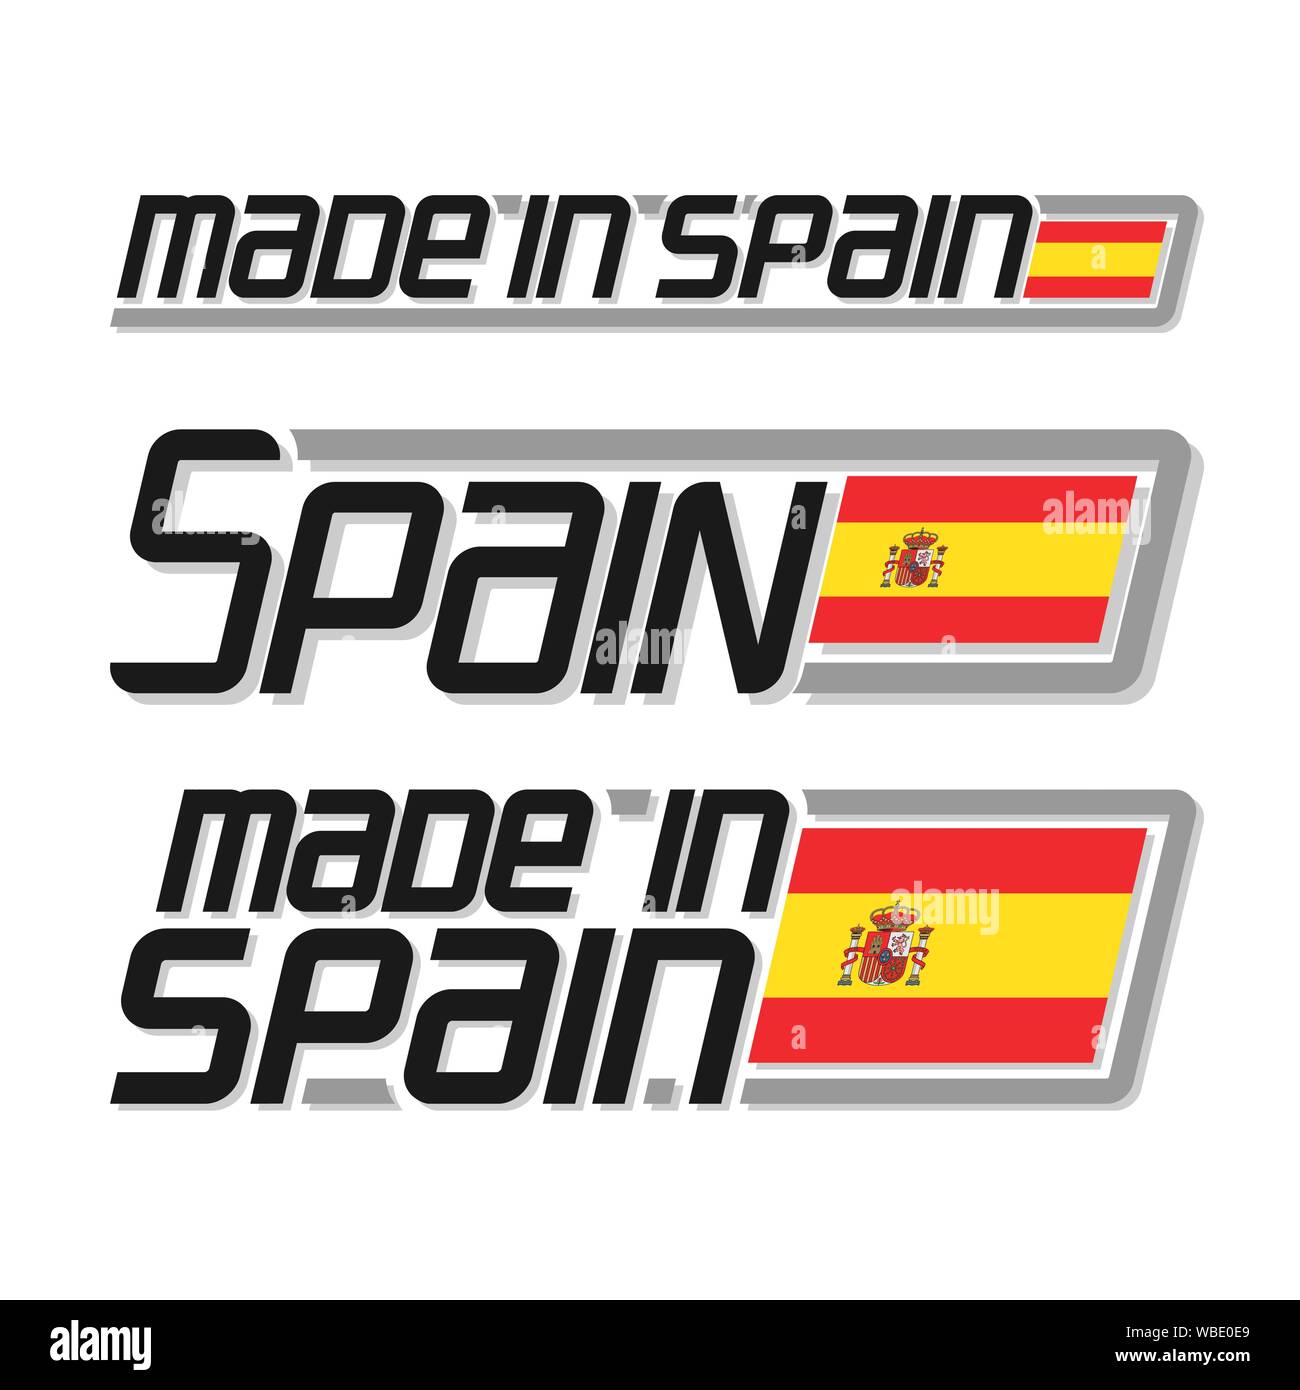 Made in spain hi-res stock photography and images - Alamy